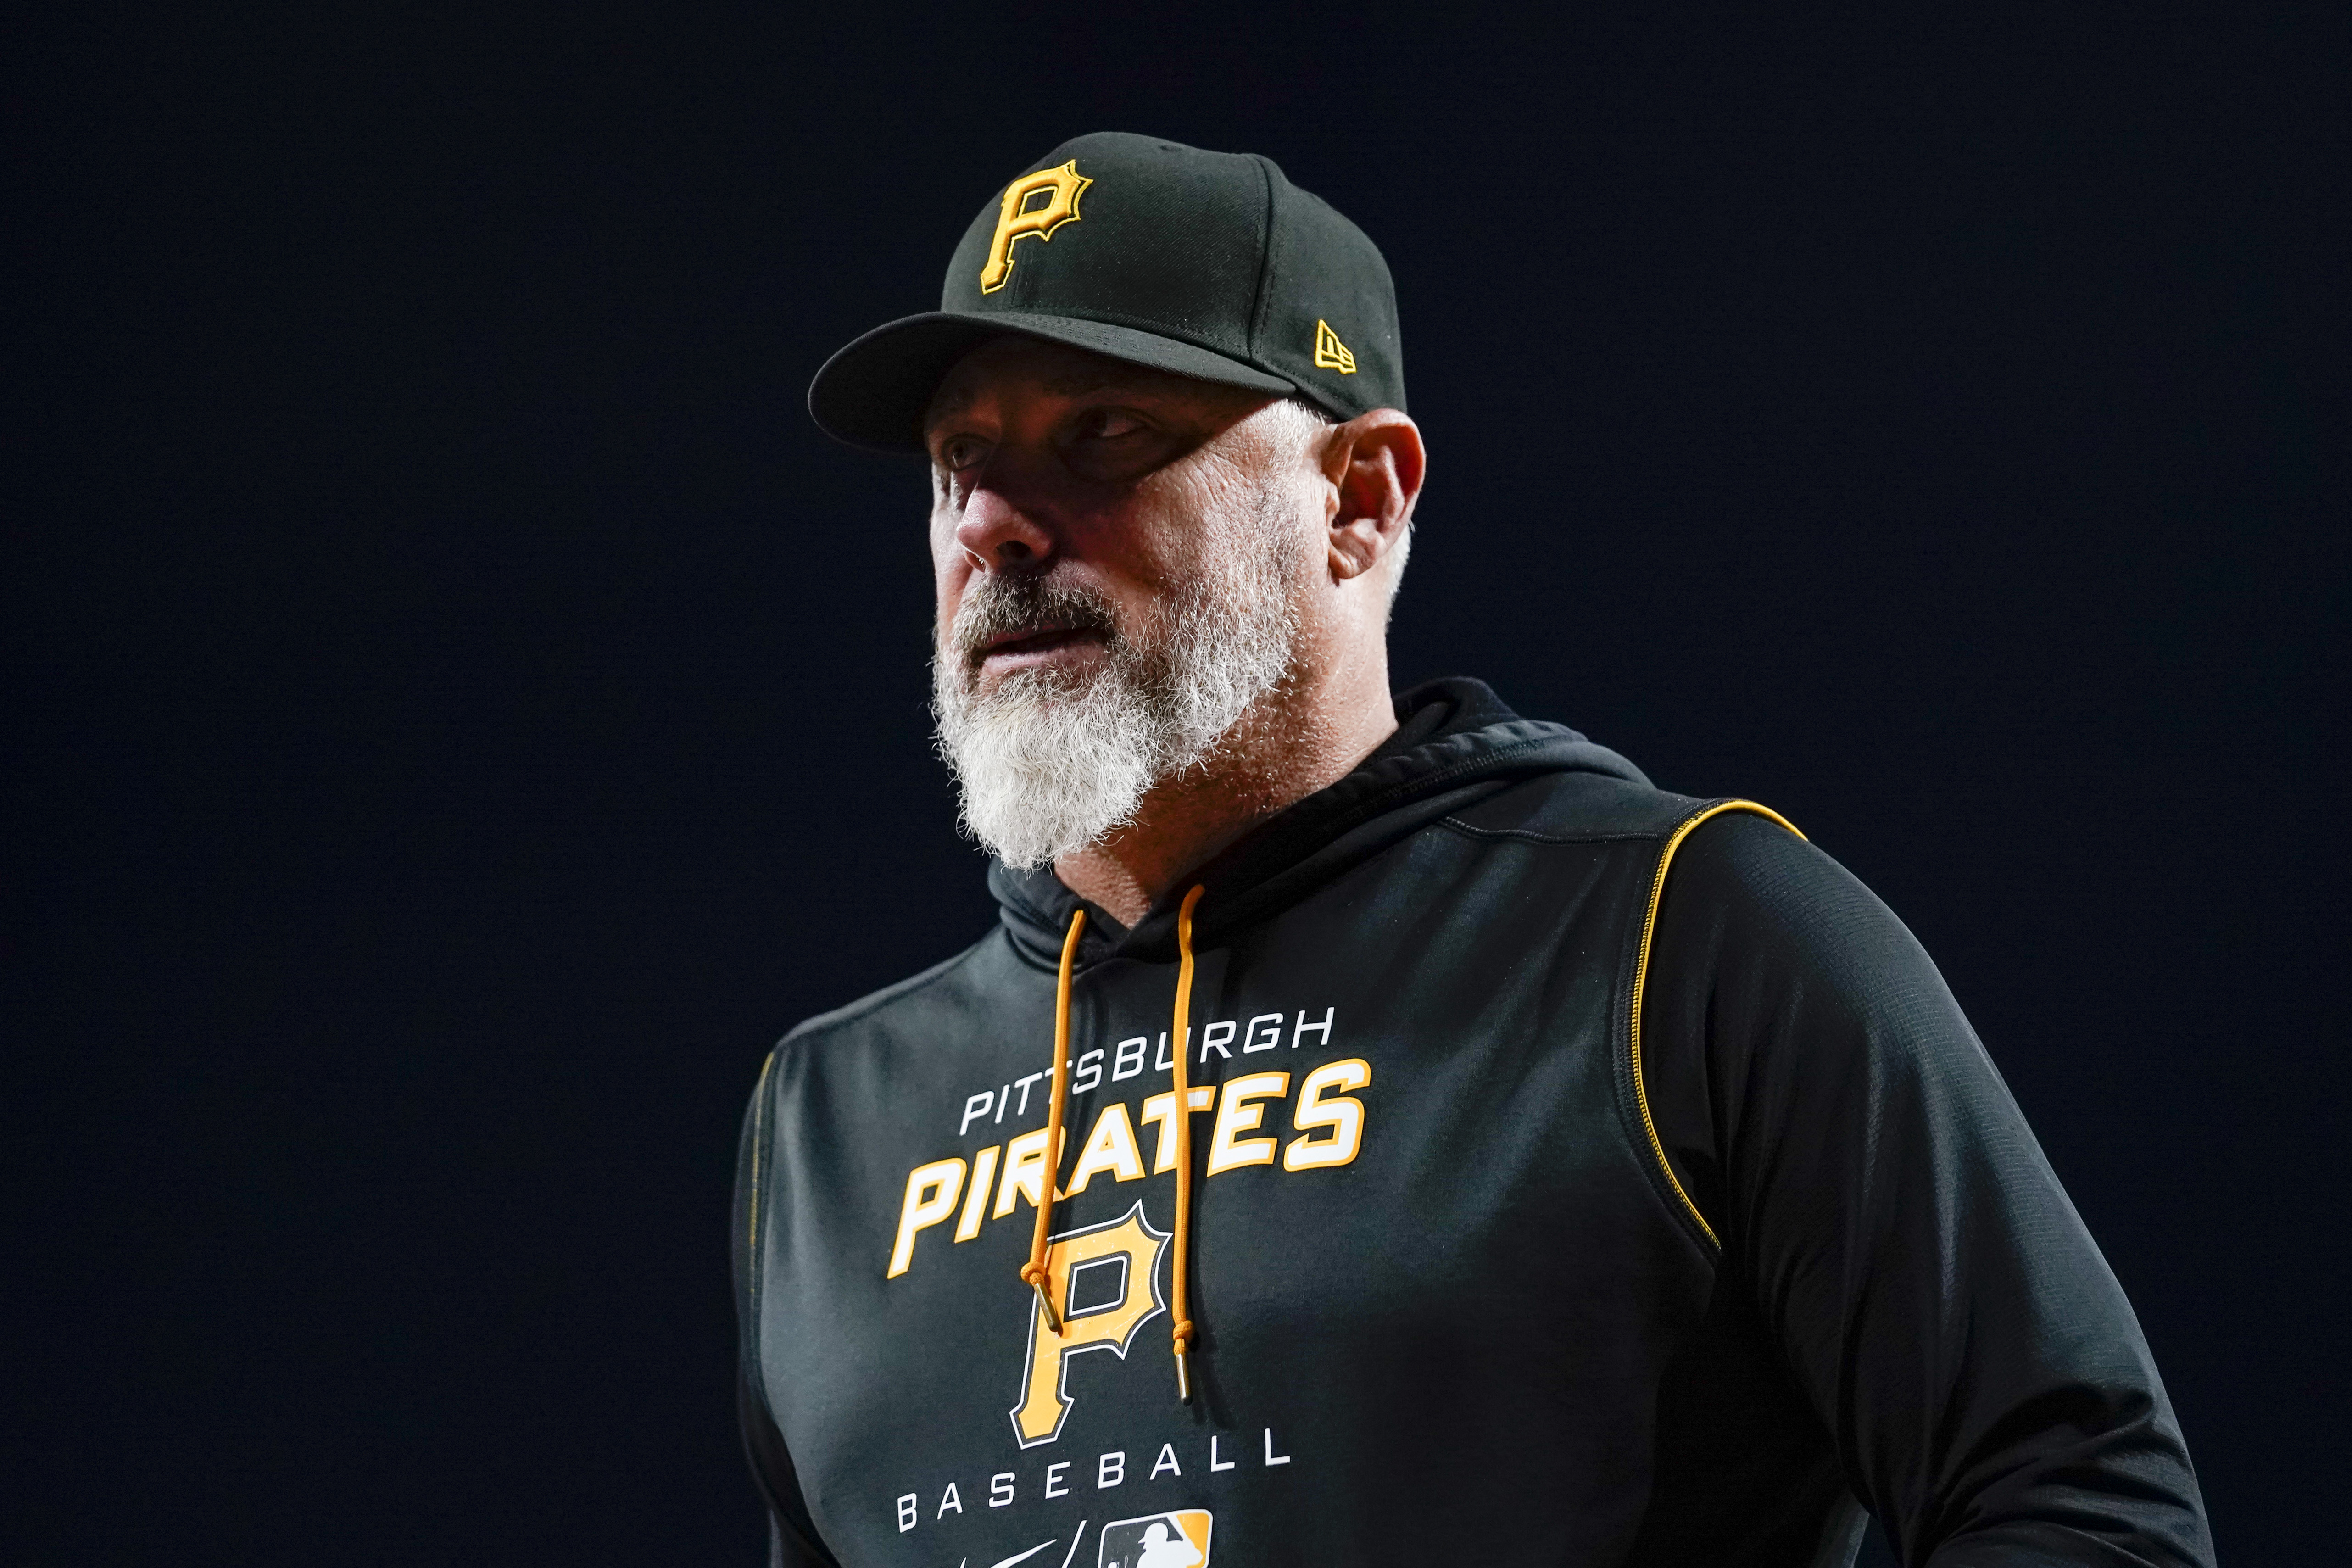 Amid the losses, Pirates believe end of overhaul is in sight